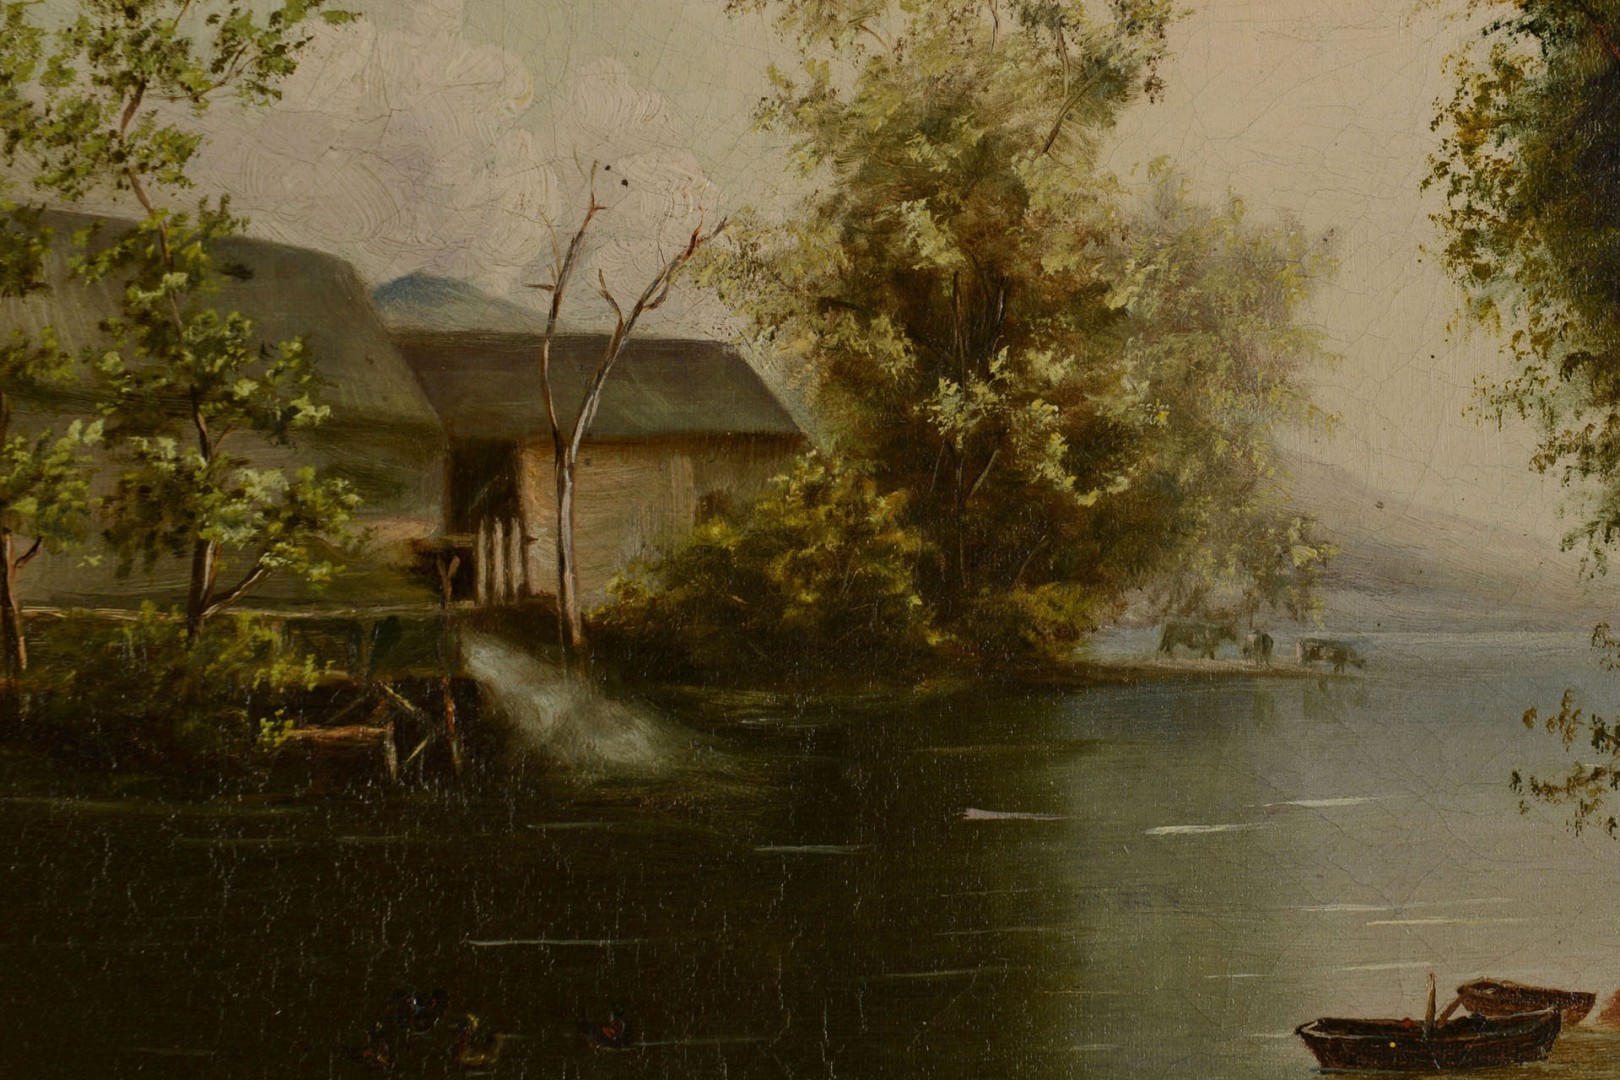 Lot 604: 19th C. Oil on Canvas, Knox County Scene